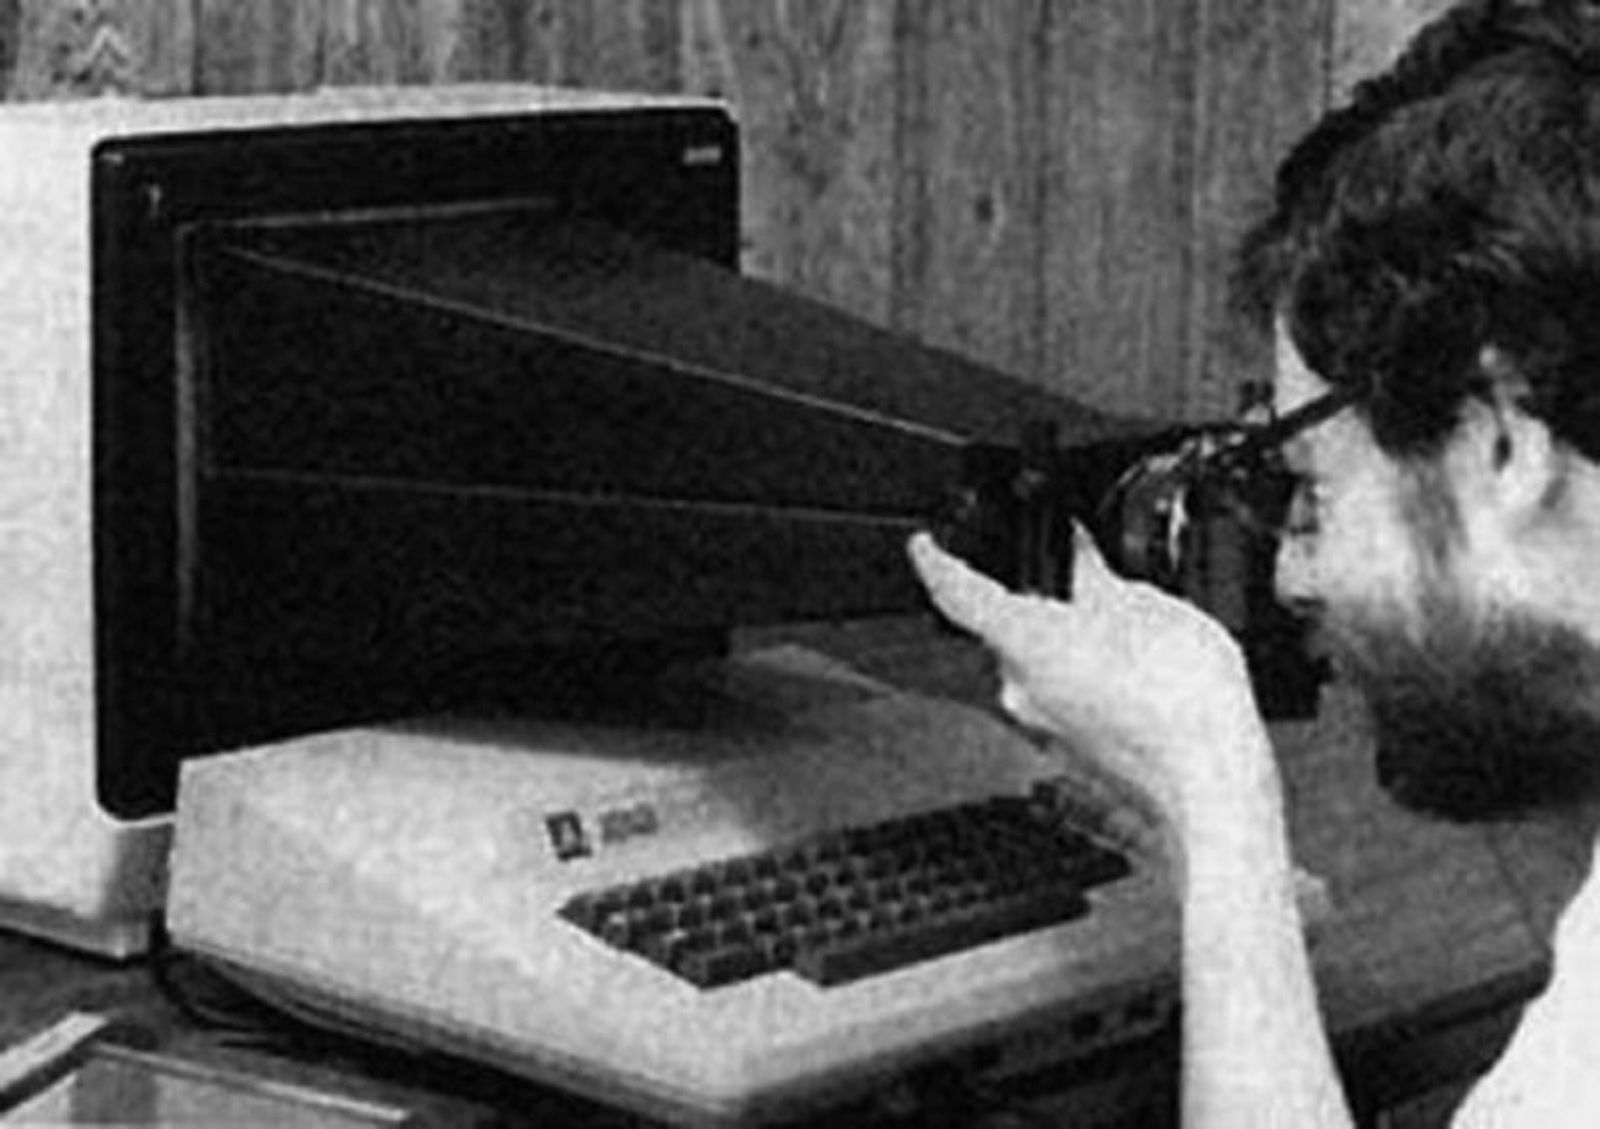 Retro Photos Of Old Technology And Simpler Times image 17